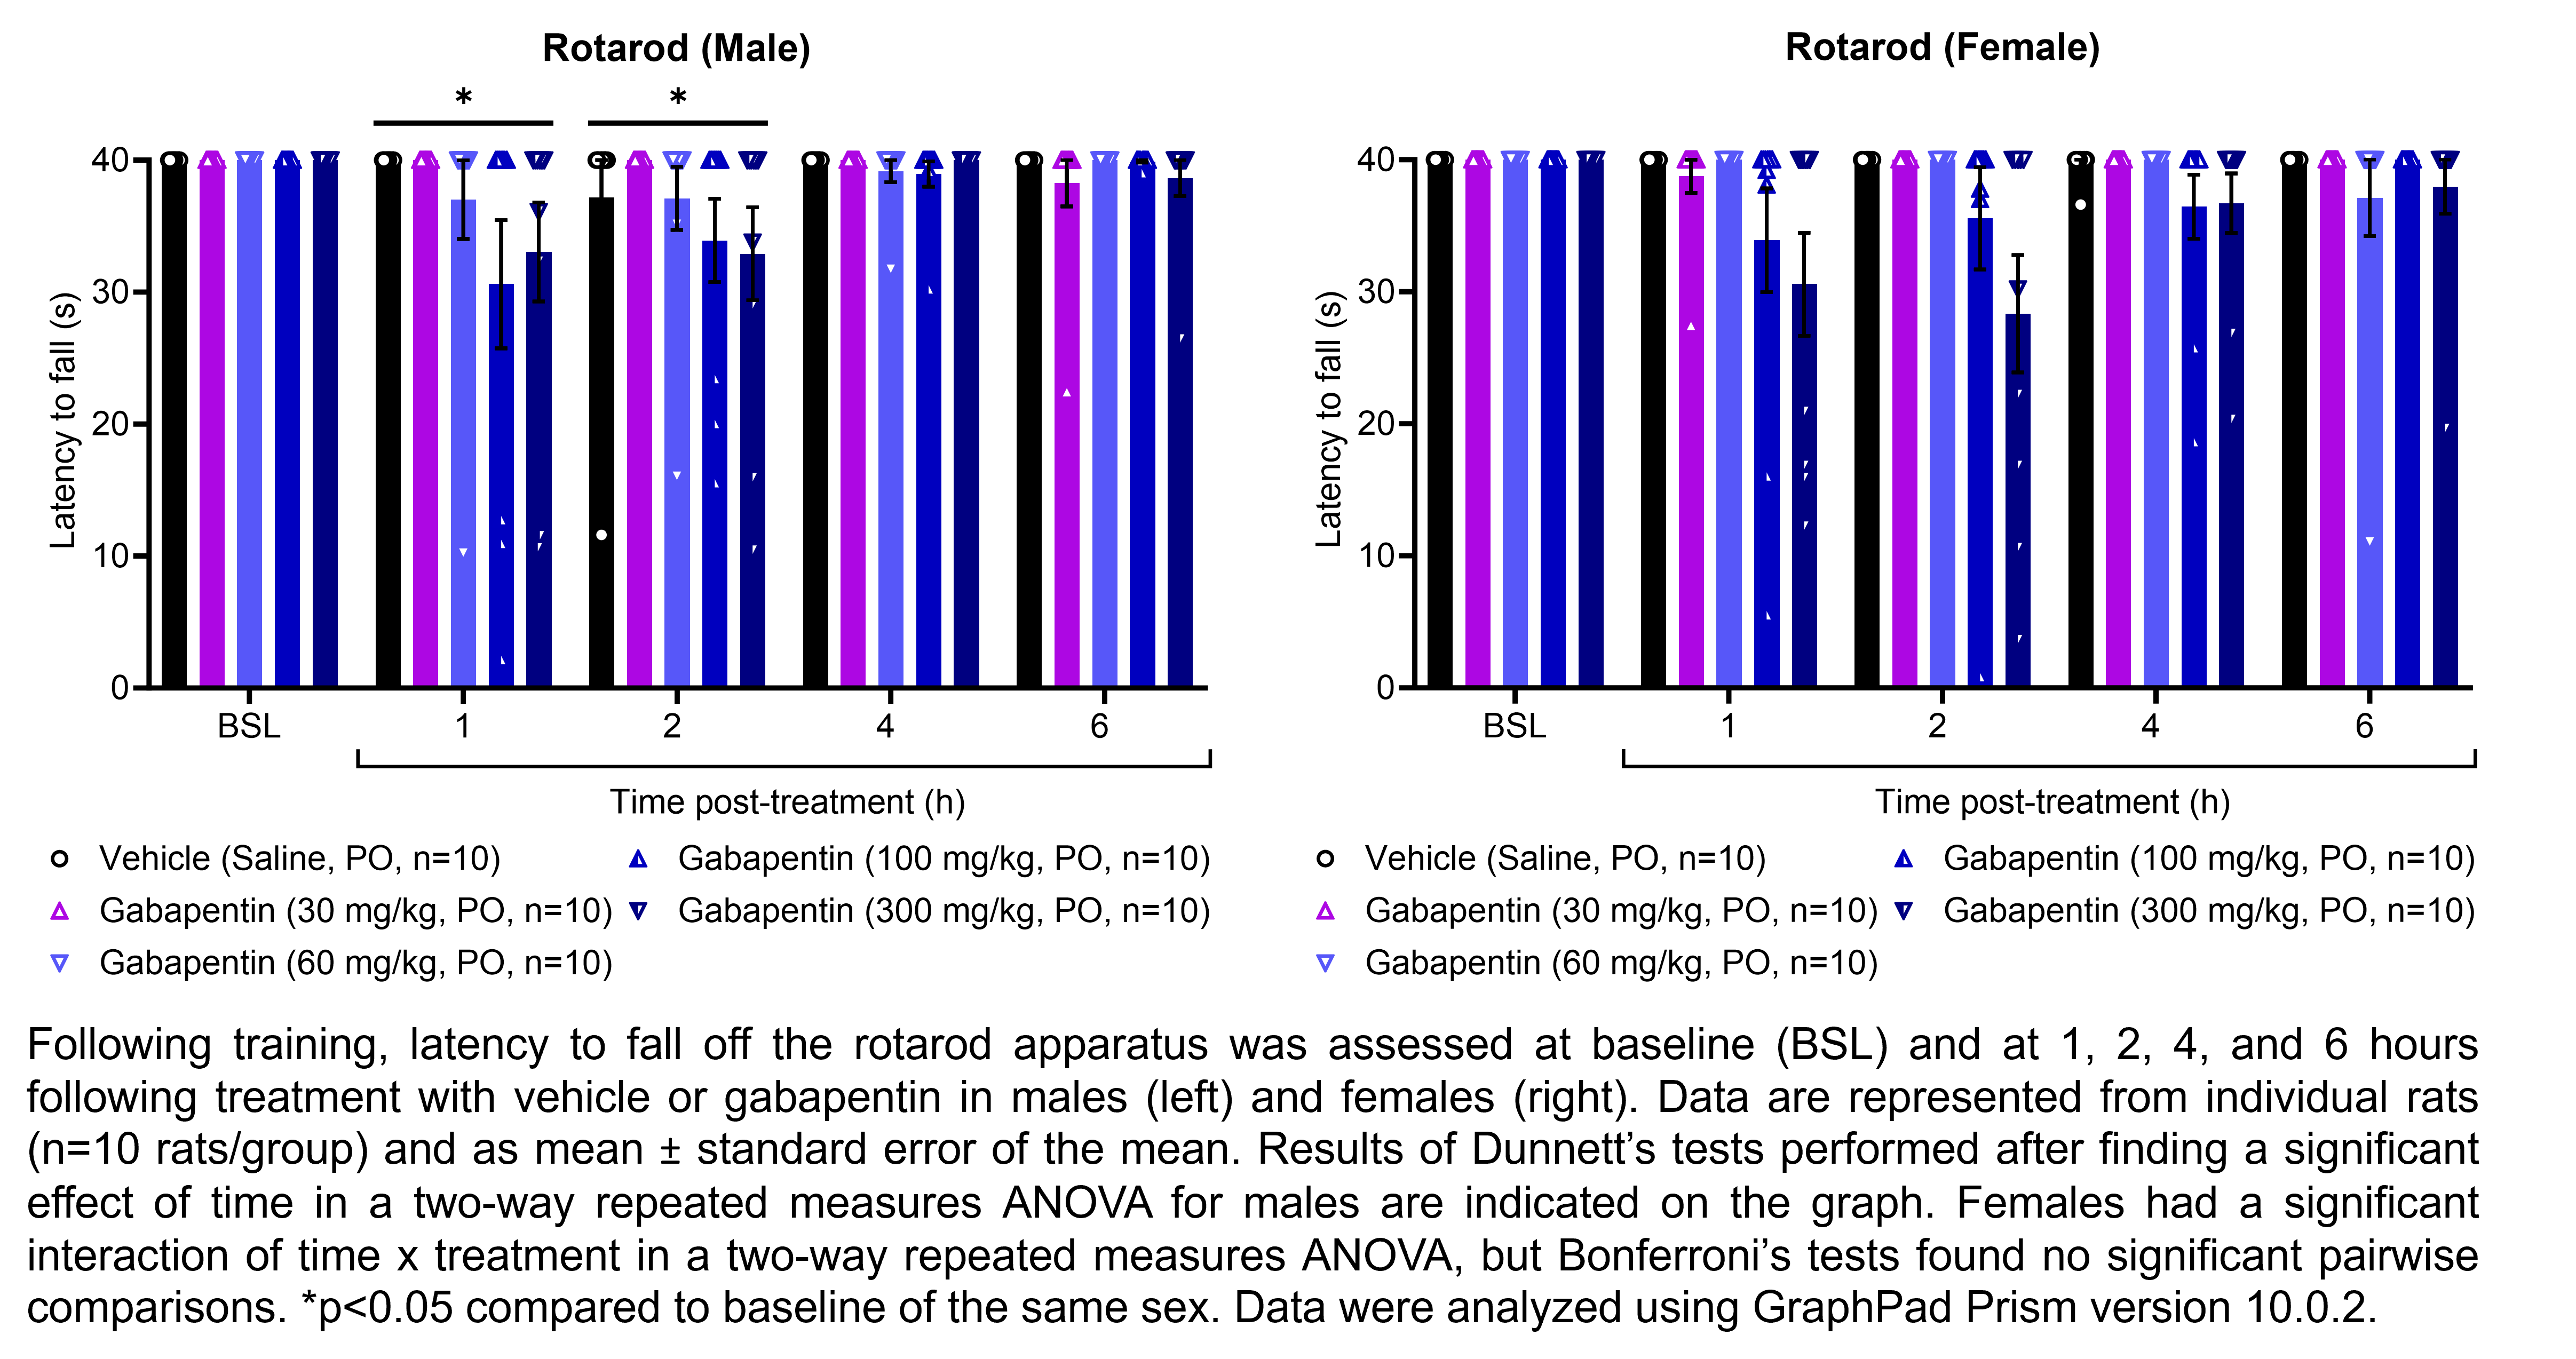 Two graphs show the latency for male or female rats to fall off a rotarod apparatus. Responses are shown at the following time points: baseline (before treatment) and at 1, 2, 4, and 6 hours after treatment with vehicle (saline, delivered PO) or gabapentin (30, 60, 100, or 300 mg/kg, delivered PO). There were 10 rats per group. Dunnett’s tests performed after finding a significant effect of time in a two-way repeated measures ANOVA for males found a significant decrease in the latency to fall relative to baseline at 1 hour (p<0.05) and 2 hours (p<0.05) after treatment. Females had a significant interaction of time x treatment in a two-way repeated measures ANOVA, but Bonferroni’s tests found no significant post hoc comparisons. Data were analyzed using GraphPad Prism version 10.0.2